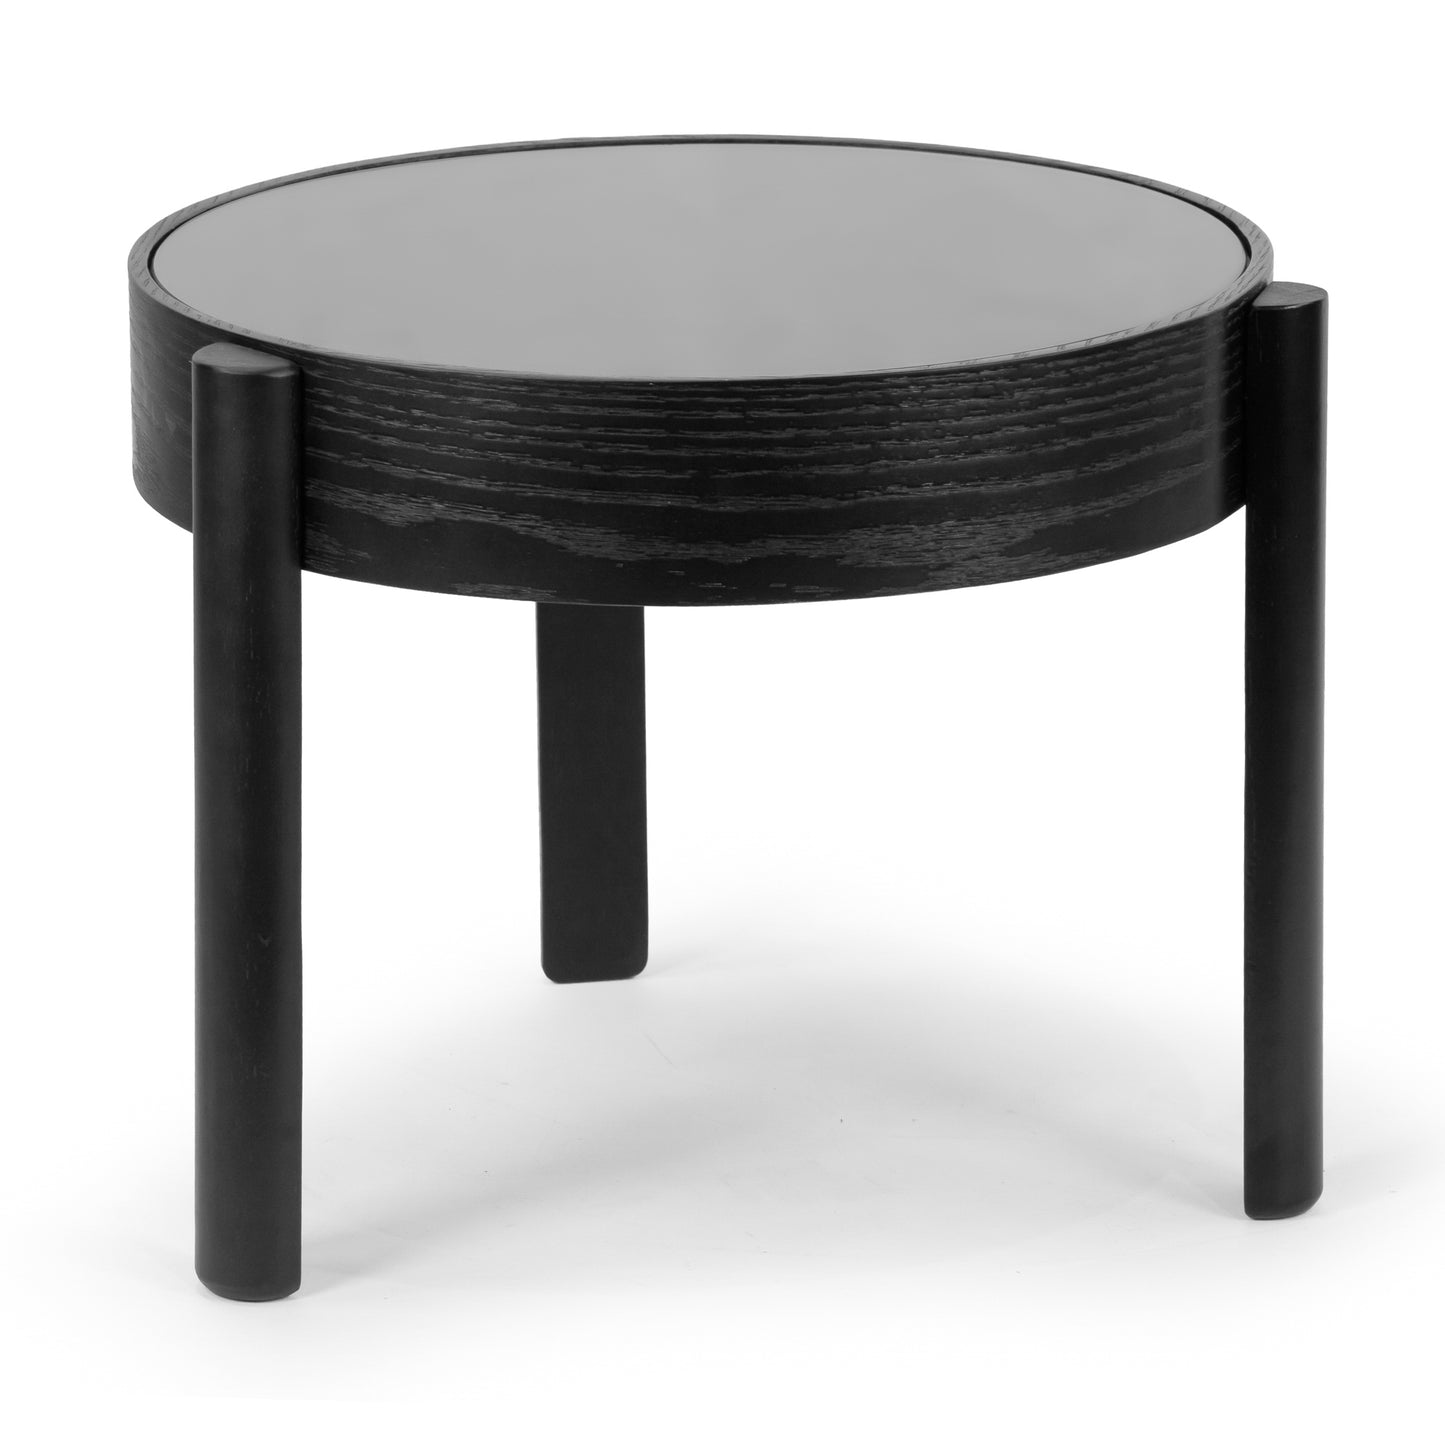 Anika Black Round Side Table with Tempered Glass Top